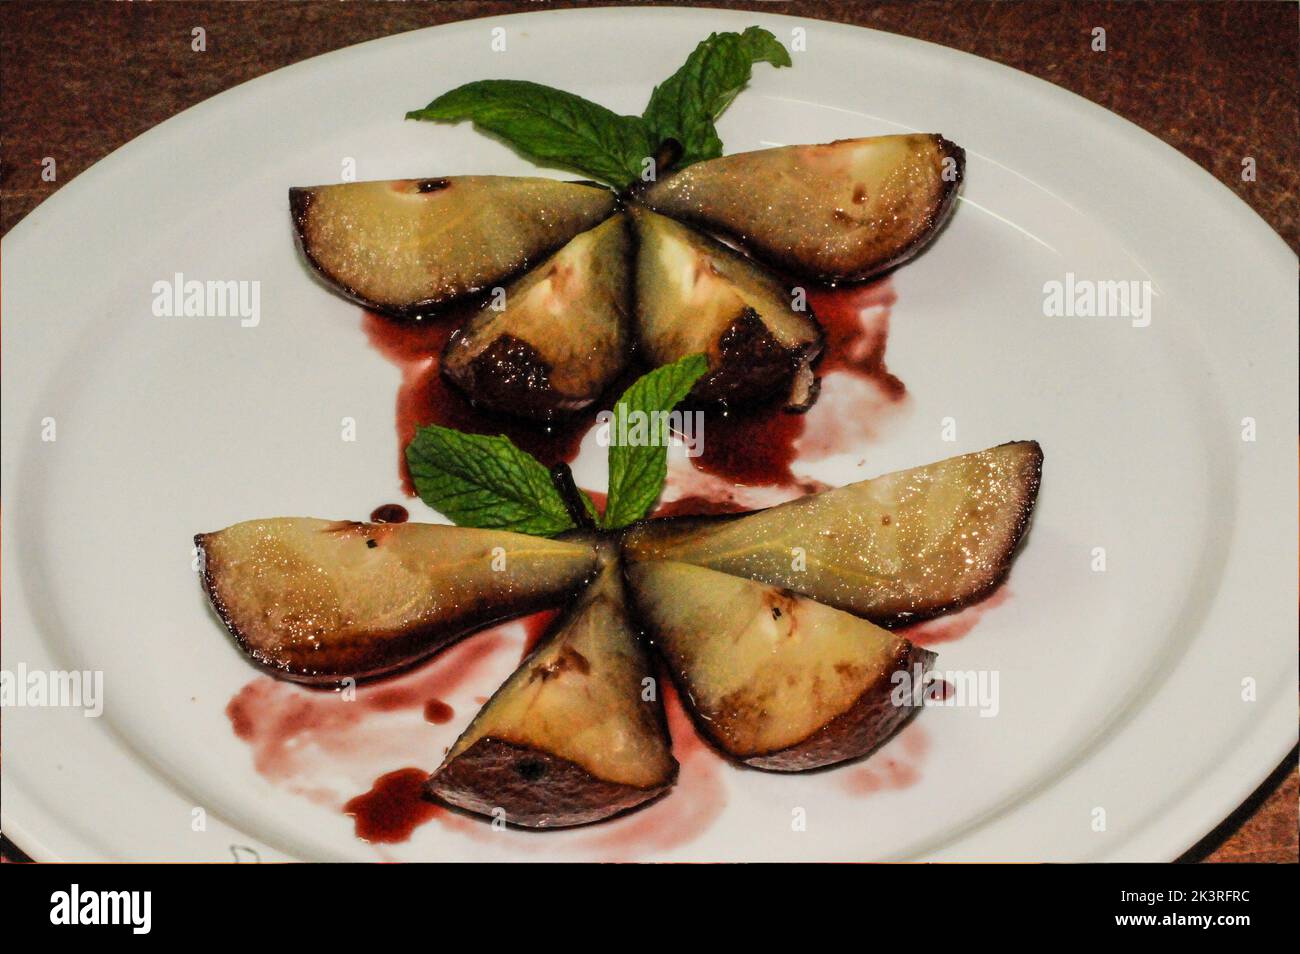 Pears in red wine bathed in their juice Stock Photo